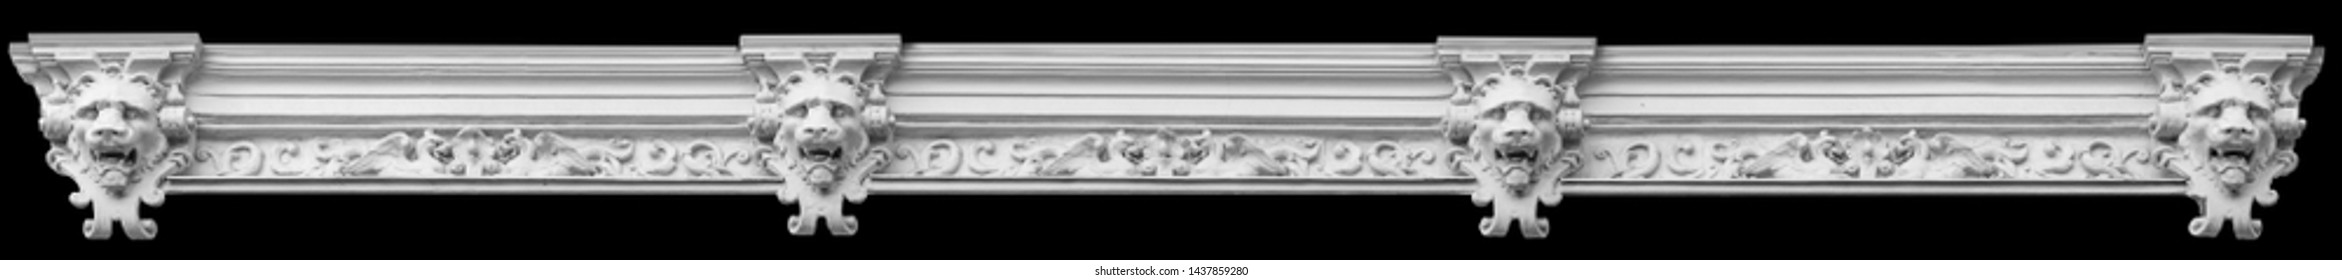 Elements of architectural decorations of buildings, gypsum stucco, wall texture, plaster ornaments and patterns. On the streets in Georgia, public places. - Shutterstock ID 1437859280